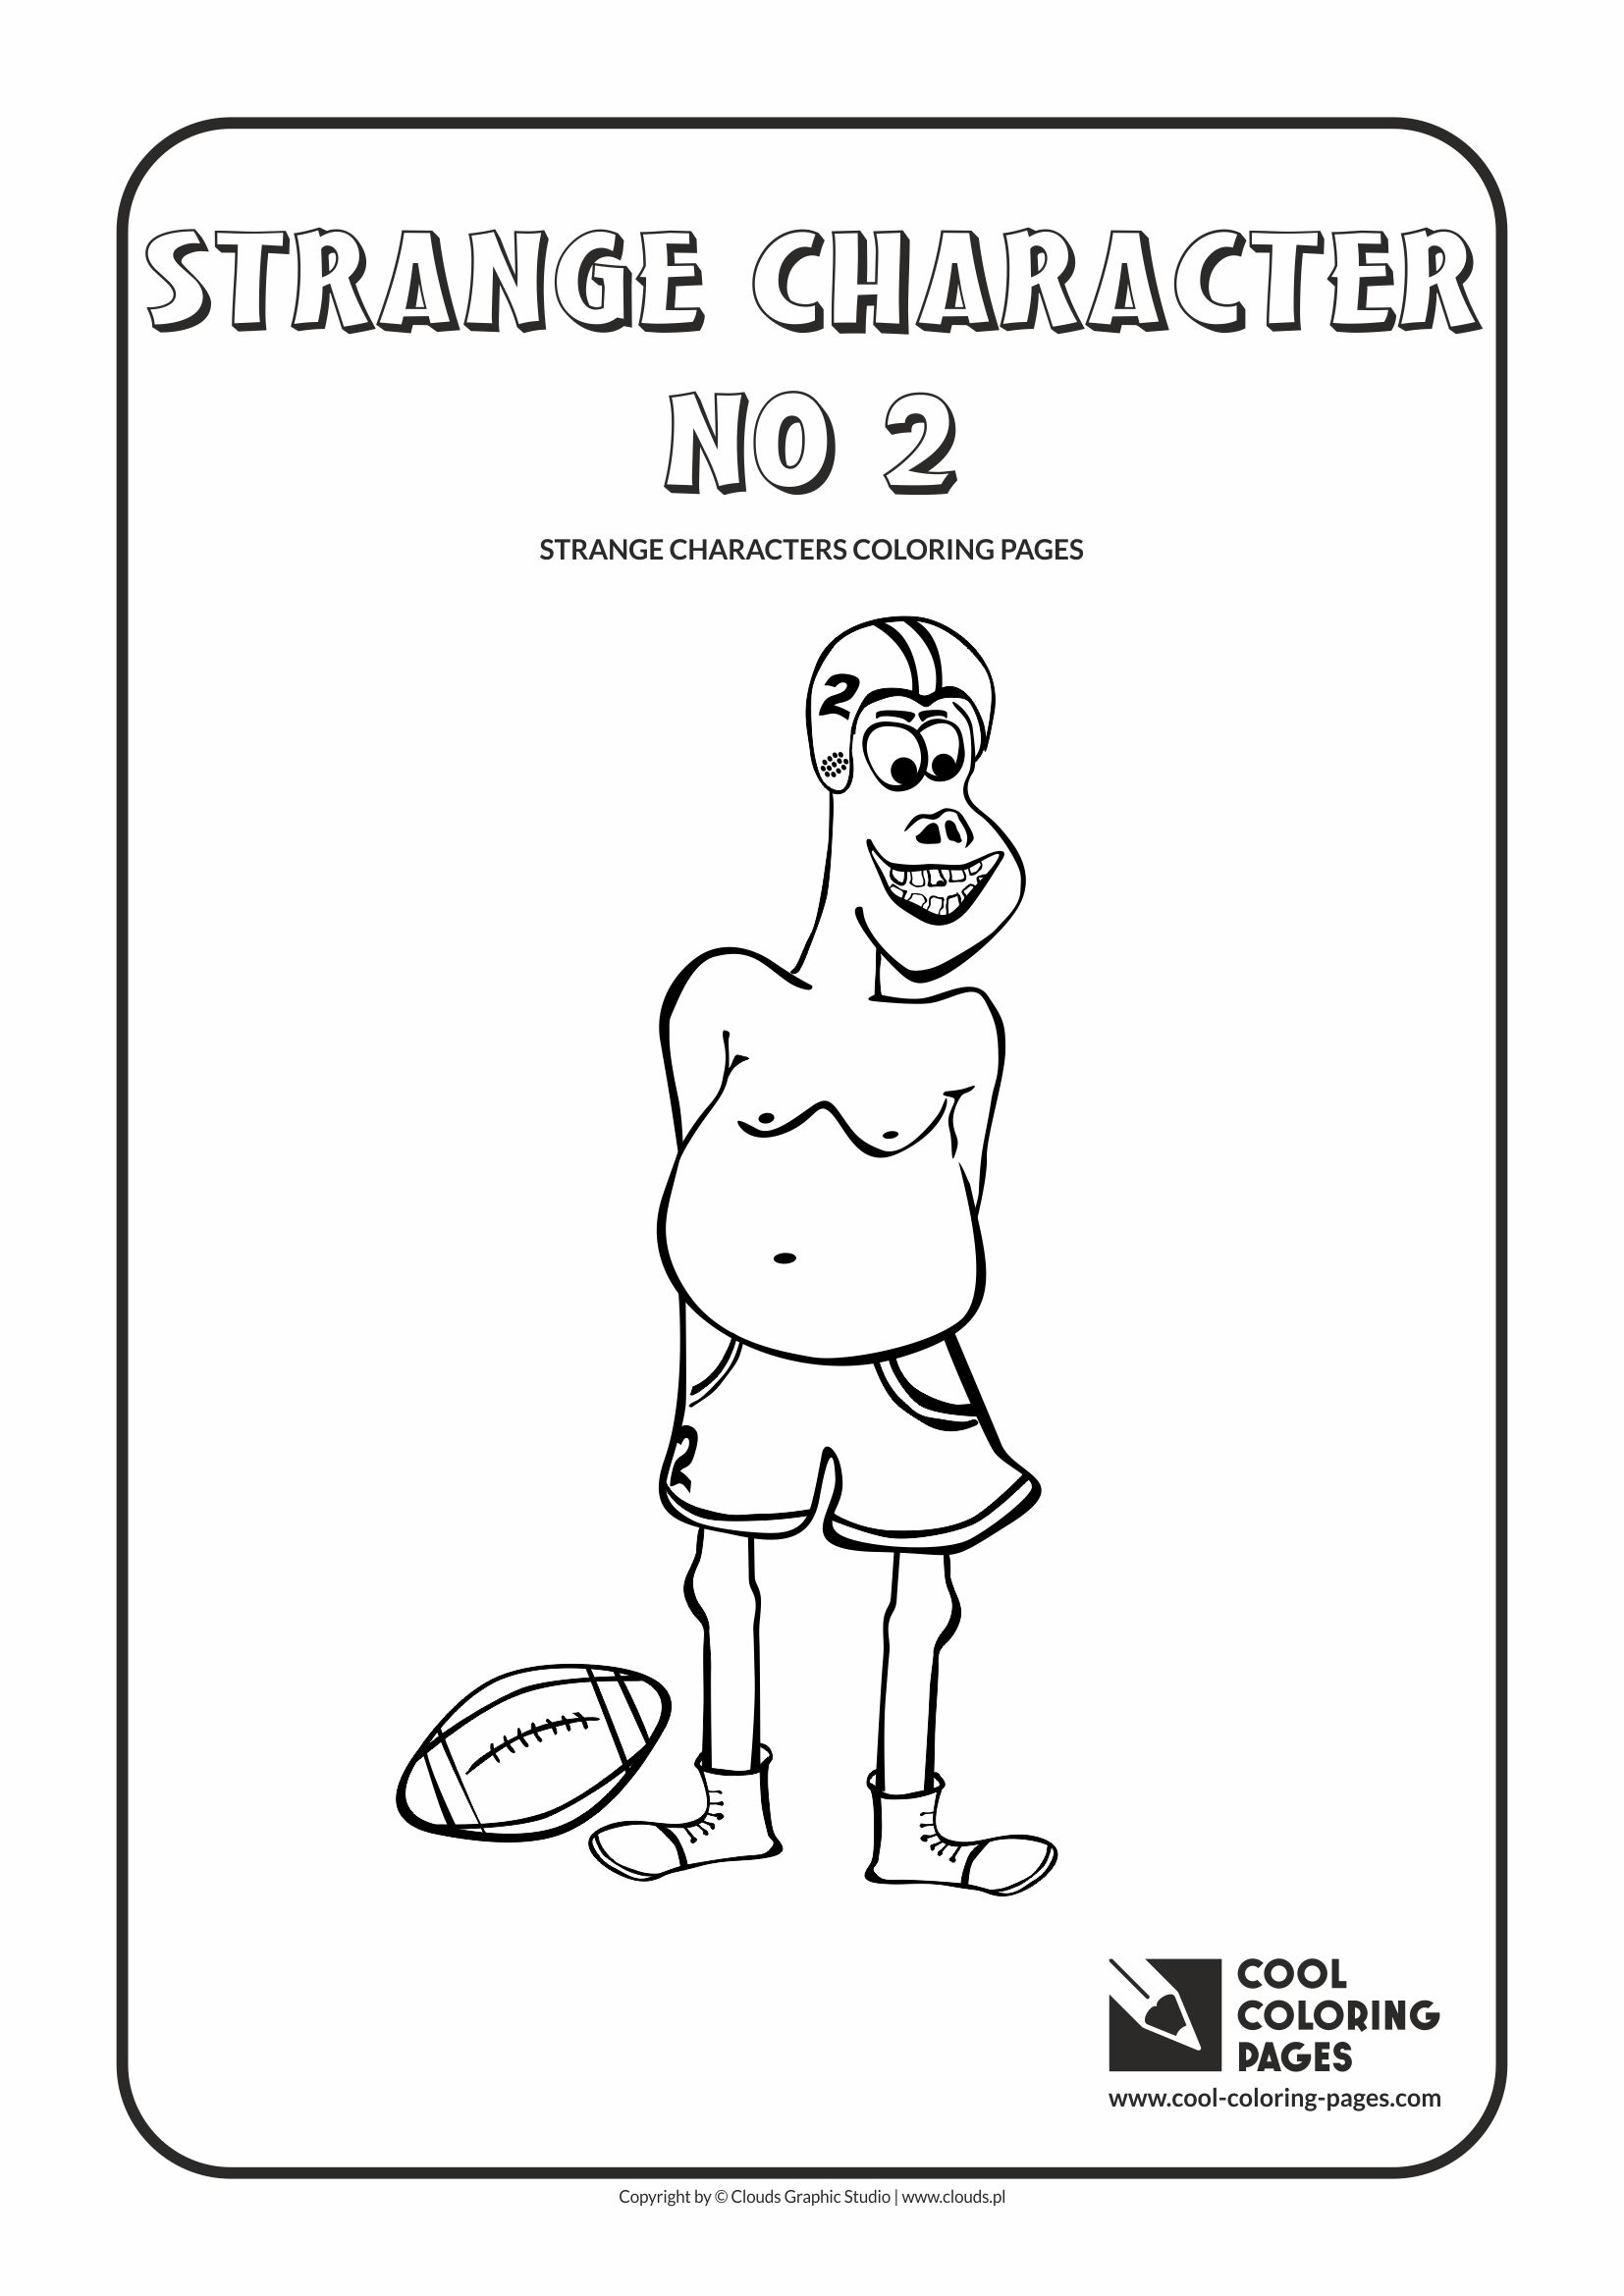 Cool Coloring Pages - Others / Strange character no 2 / Coloring page with strange character no 2